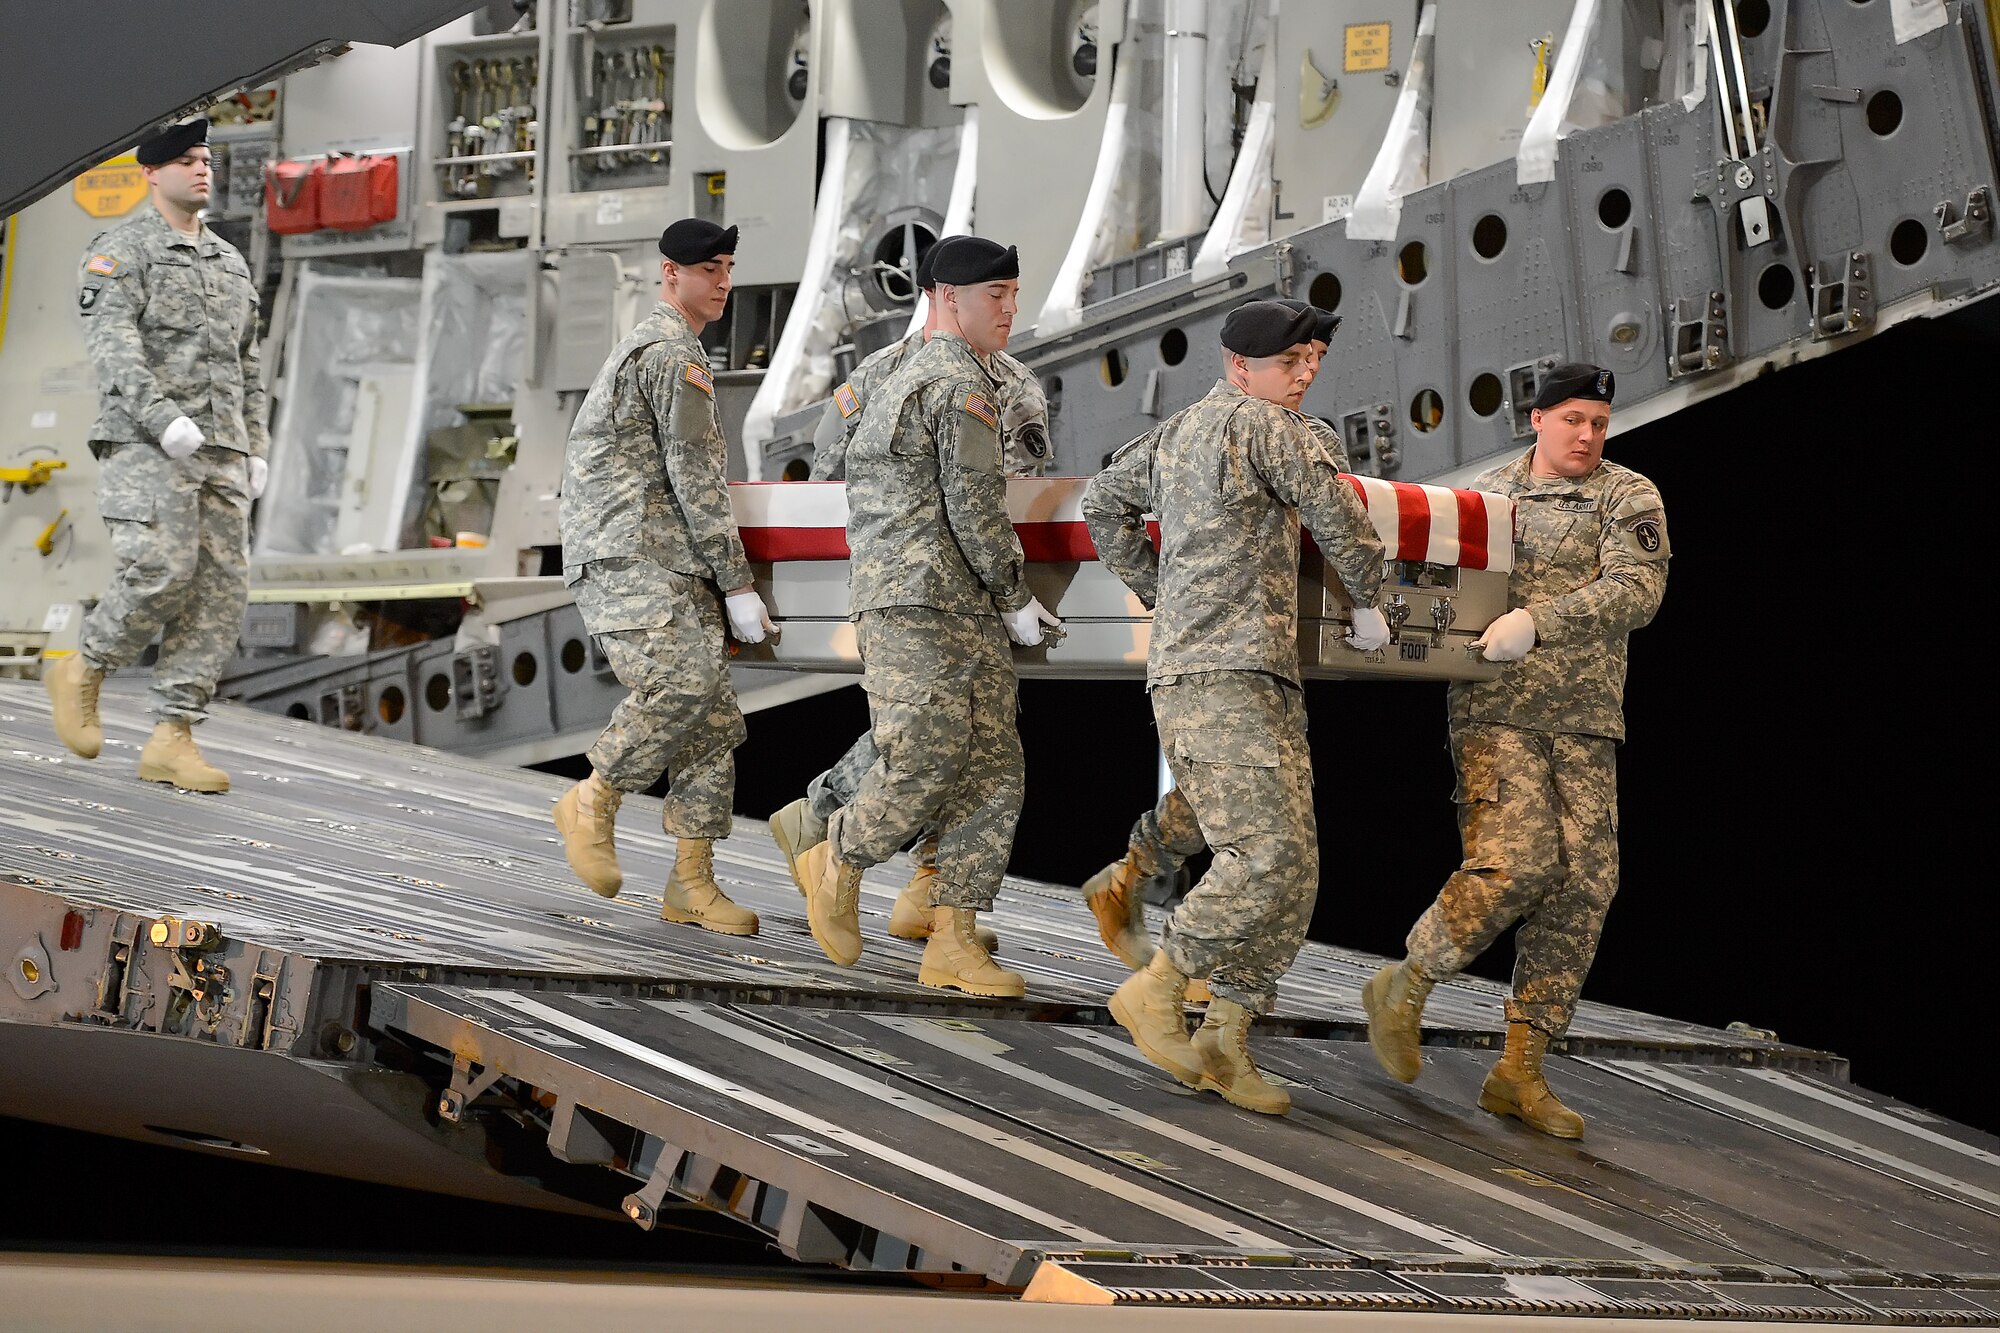 A U.S. Army carry team transfers the remains of Spc. Terry K. D. Gordon, of Shubata, Miss., during a dignified transfer Dec. 19, 2013 at Dover Air Force Base, Del. Gordon was assigned to the 1st Squadron, 6th Cavalry Regiment, 1st Combat Aviation Brigade, 1st Infantry Division, Fort Riley, Kan. (U.S. Air Force photo/Greg L. Davis)